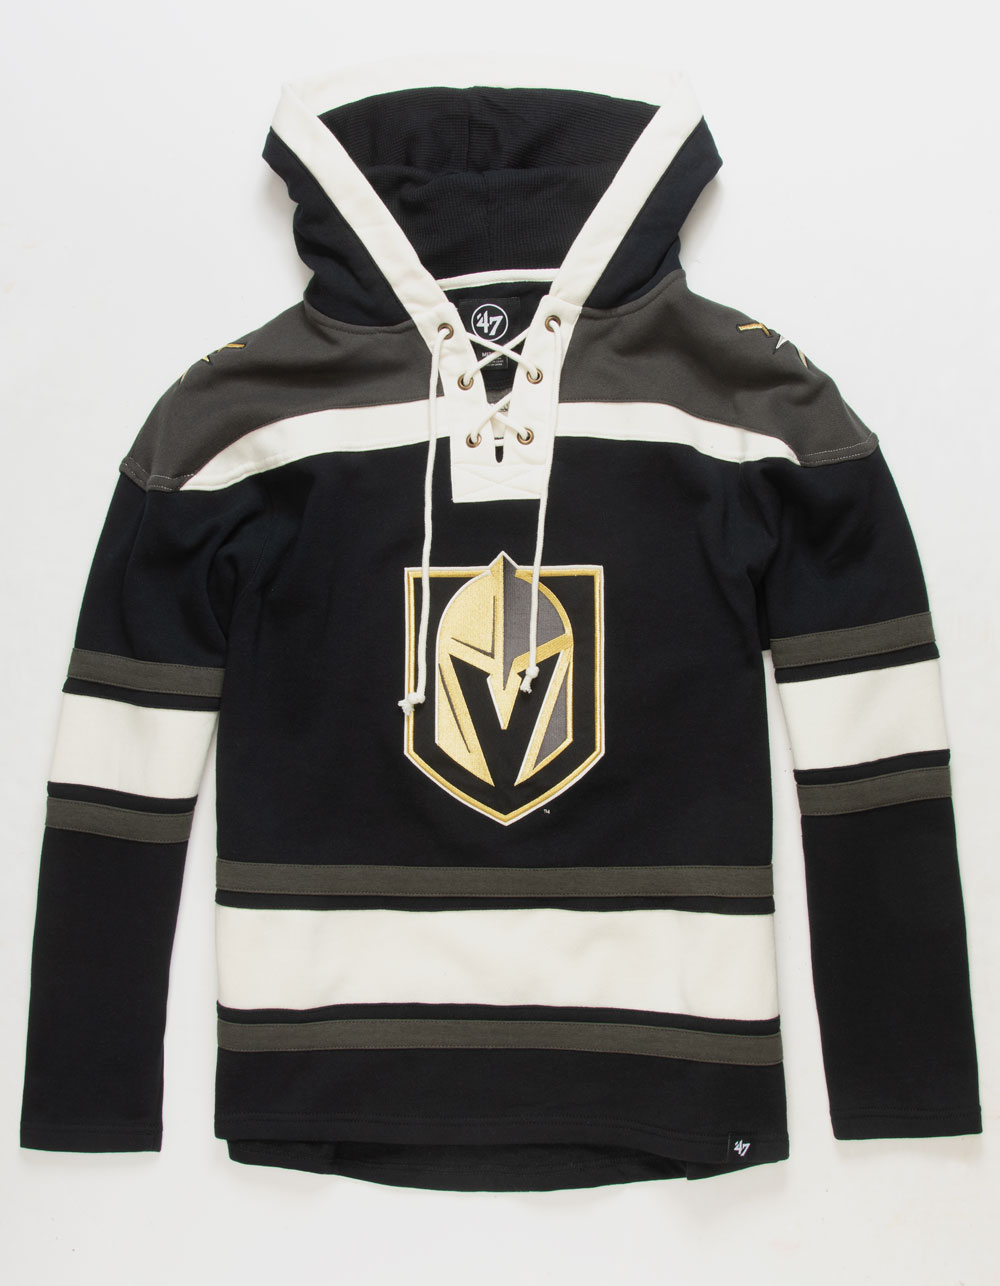 47 Men's Vegas Golden Knights Superior Lacer Pullover Hoodie